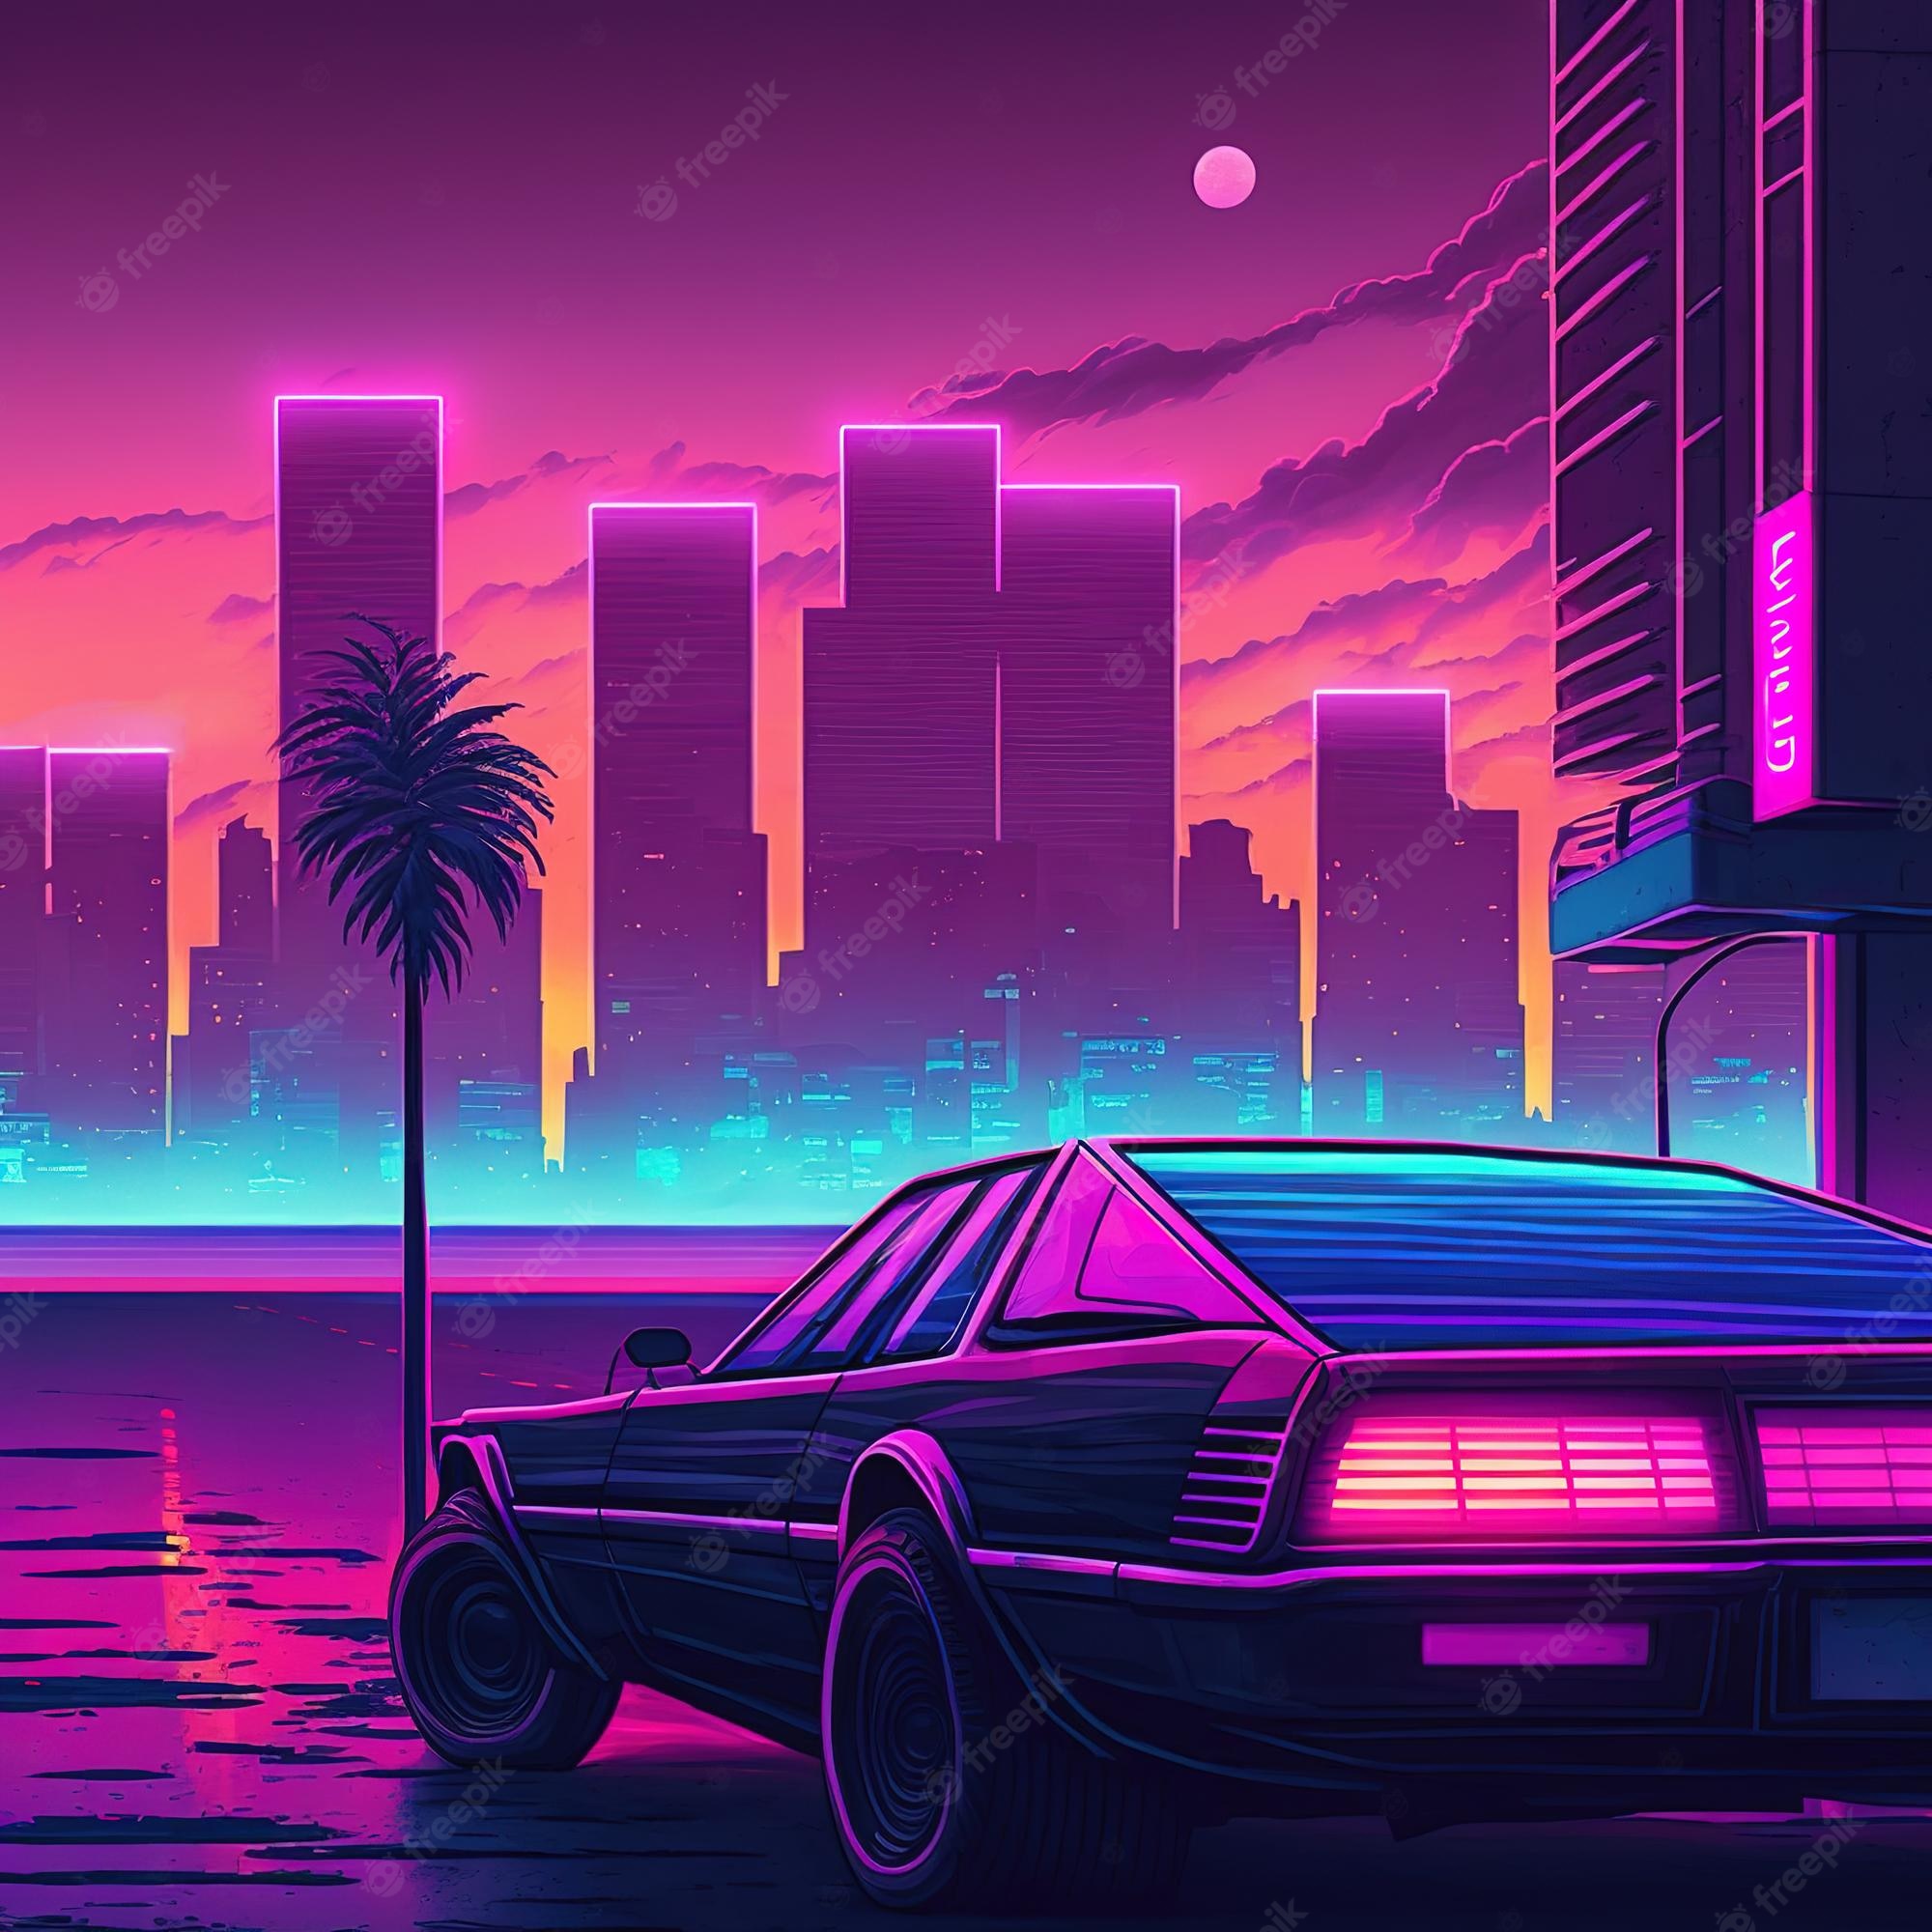 A retro futuristic city with neon lights and cars, car png - Vaporwave